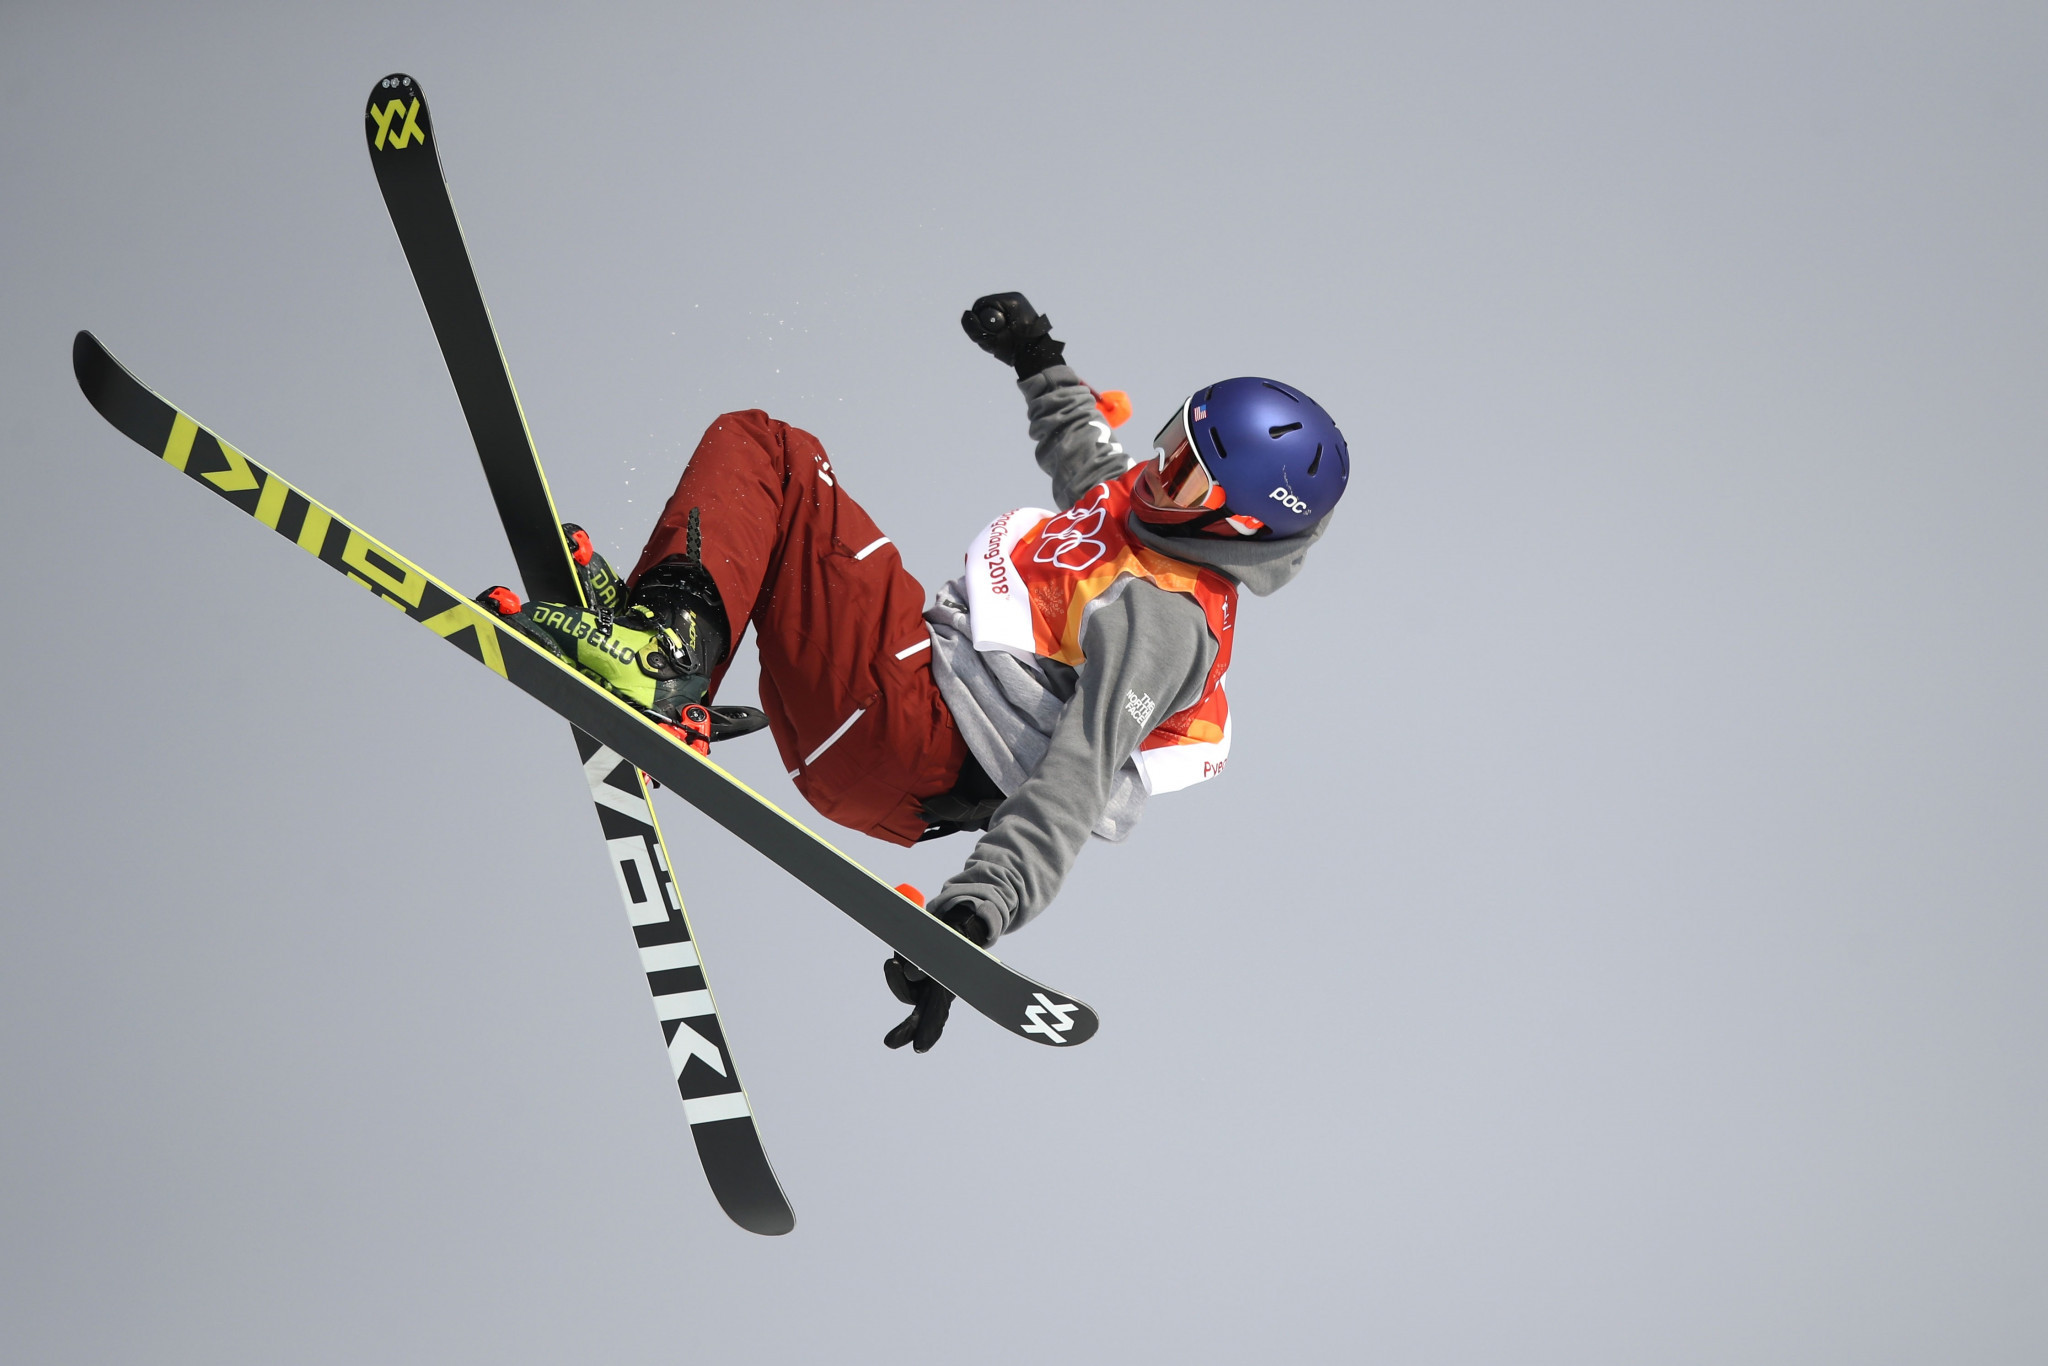 American Nick Goepper's third-run score of 93.60 points earned him the silver medal ©Getty Images